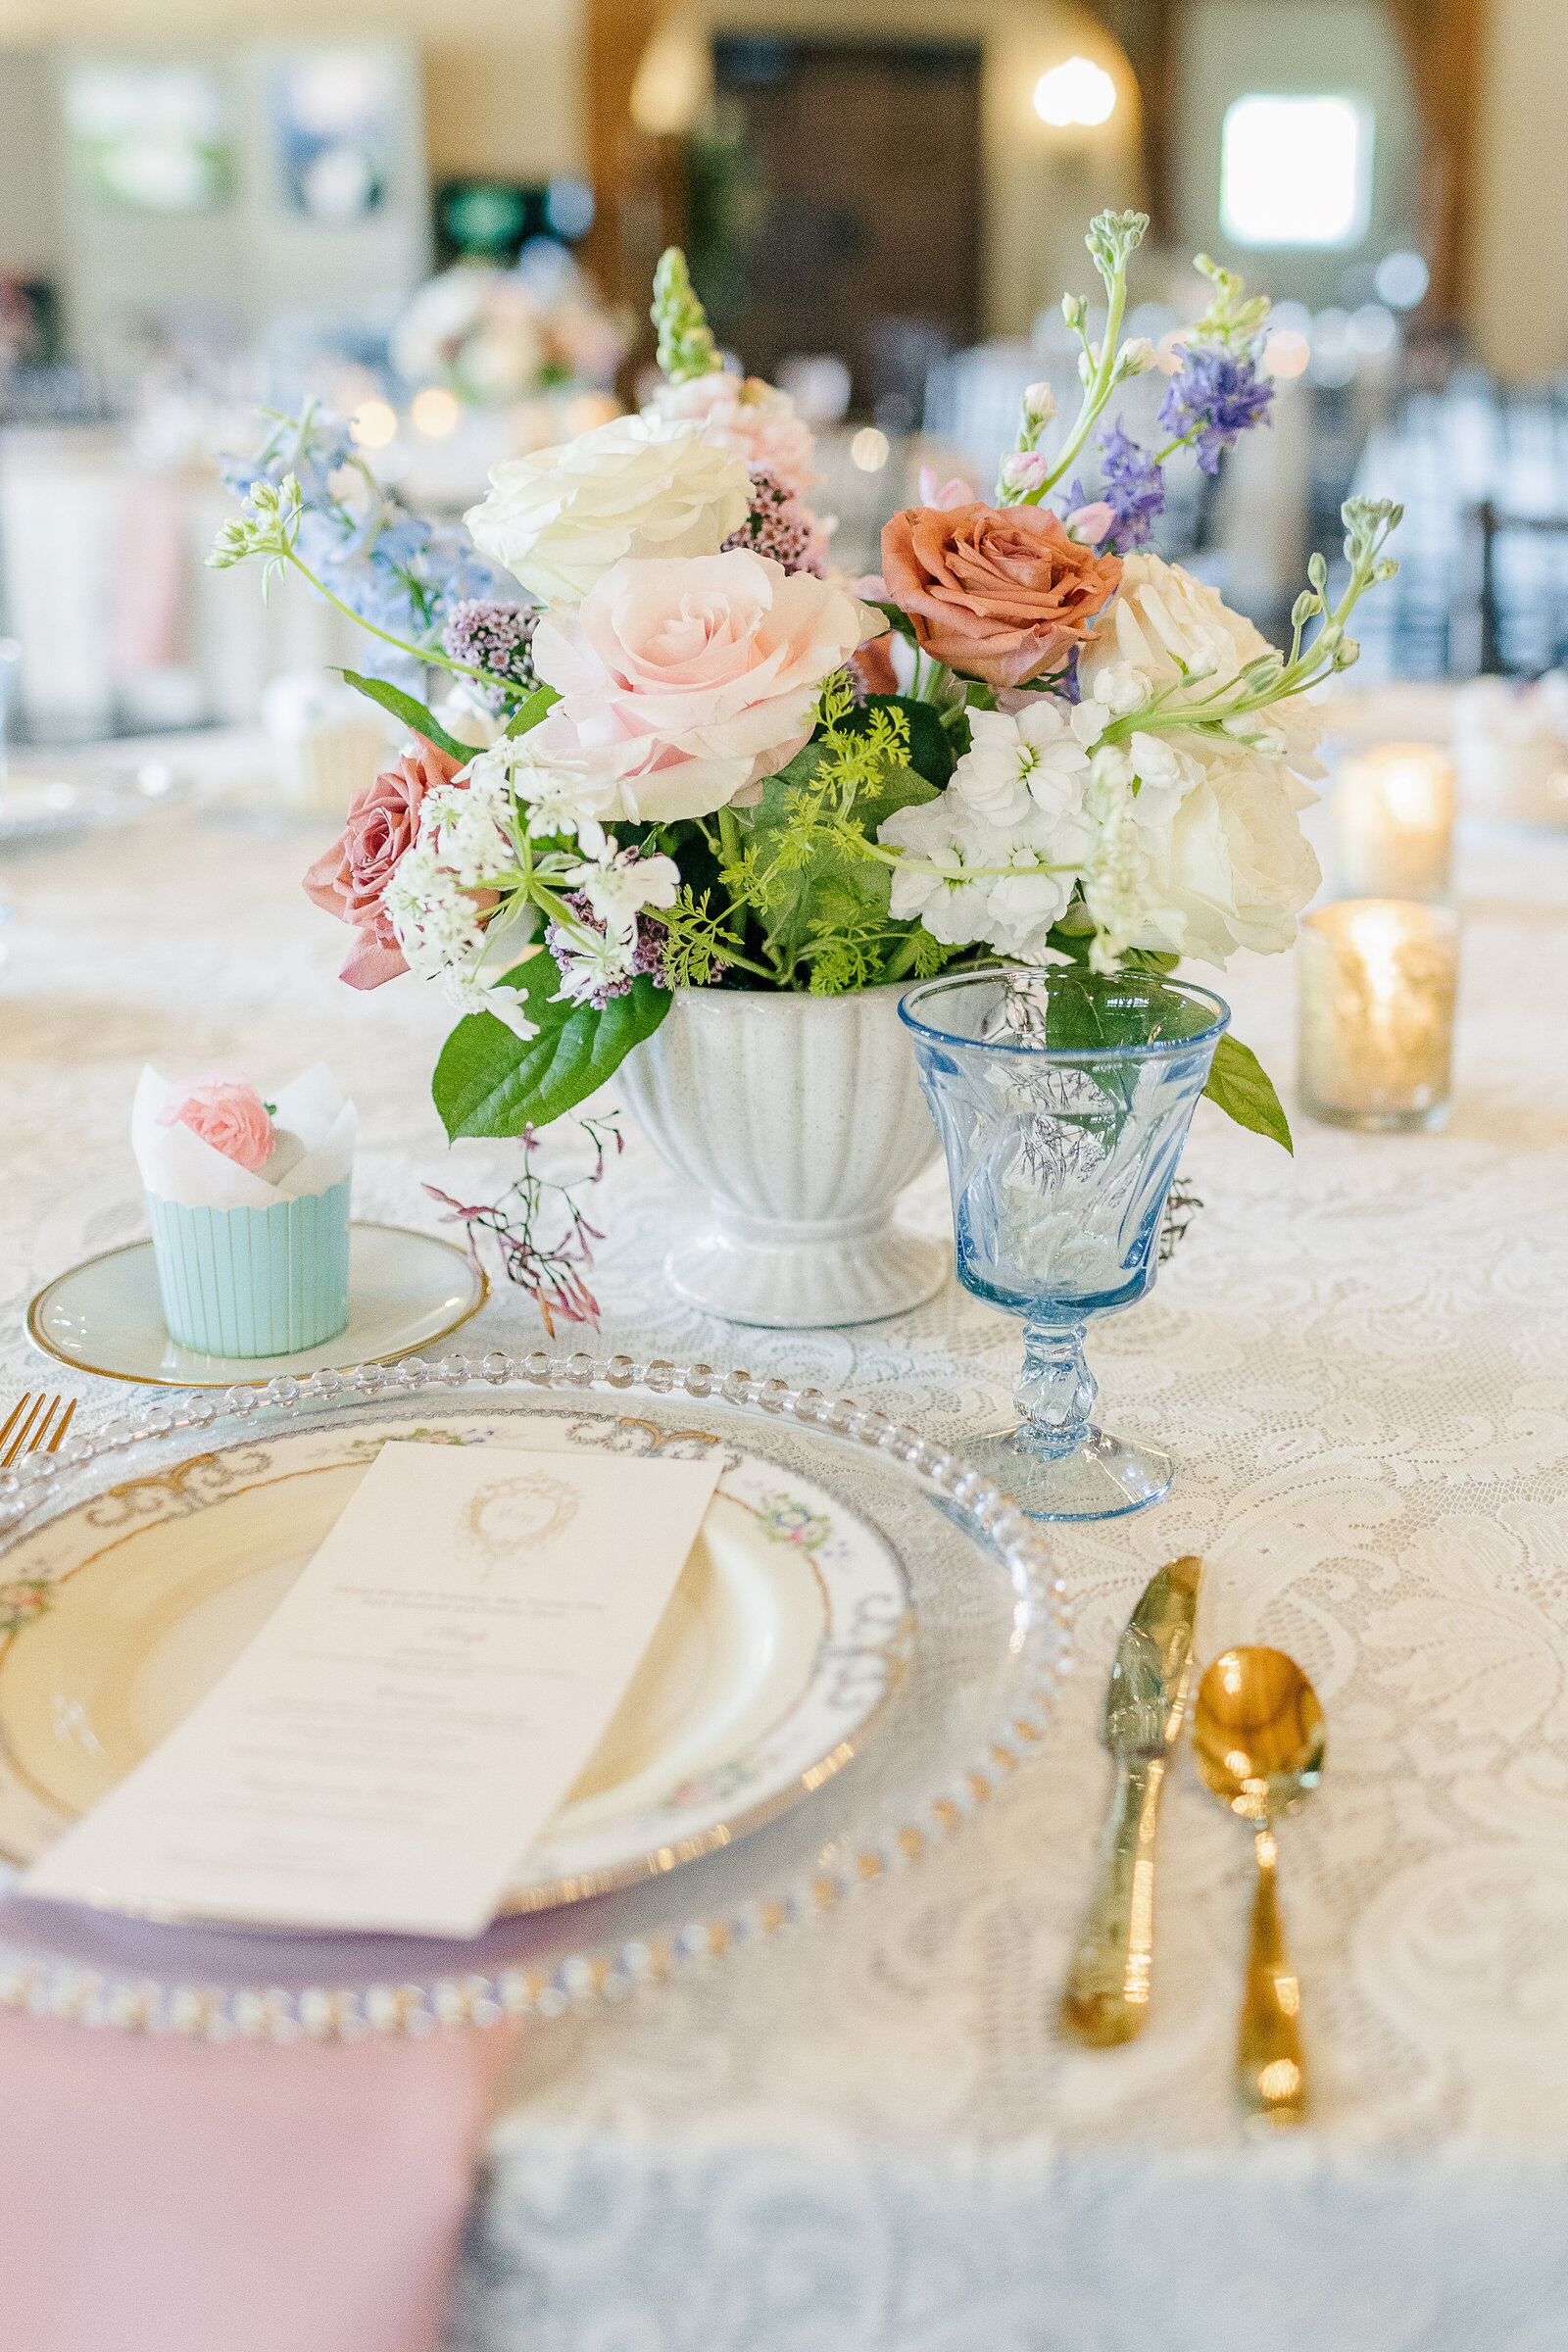 Luxury Tablescape with fresh floral centerpiece